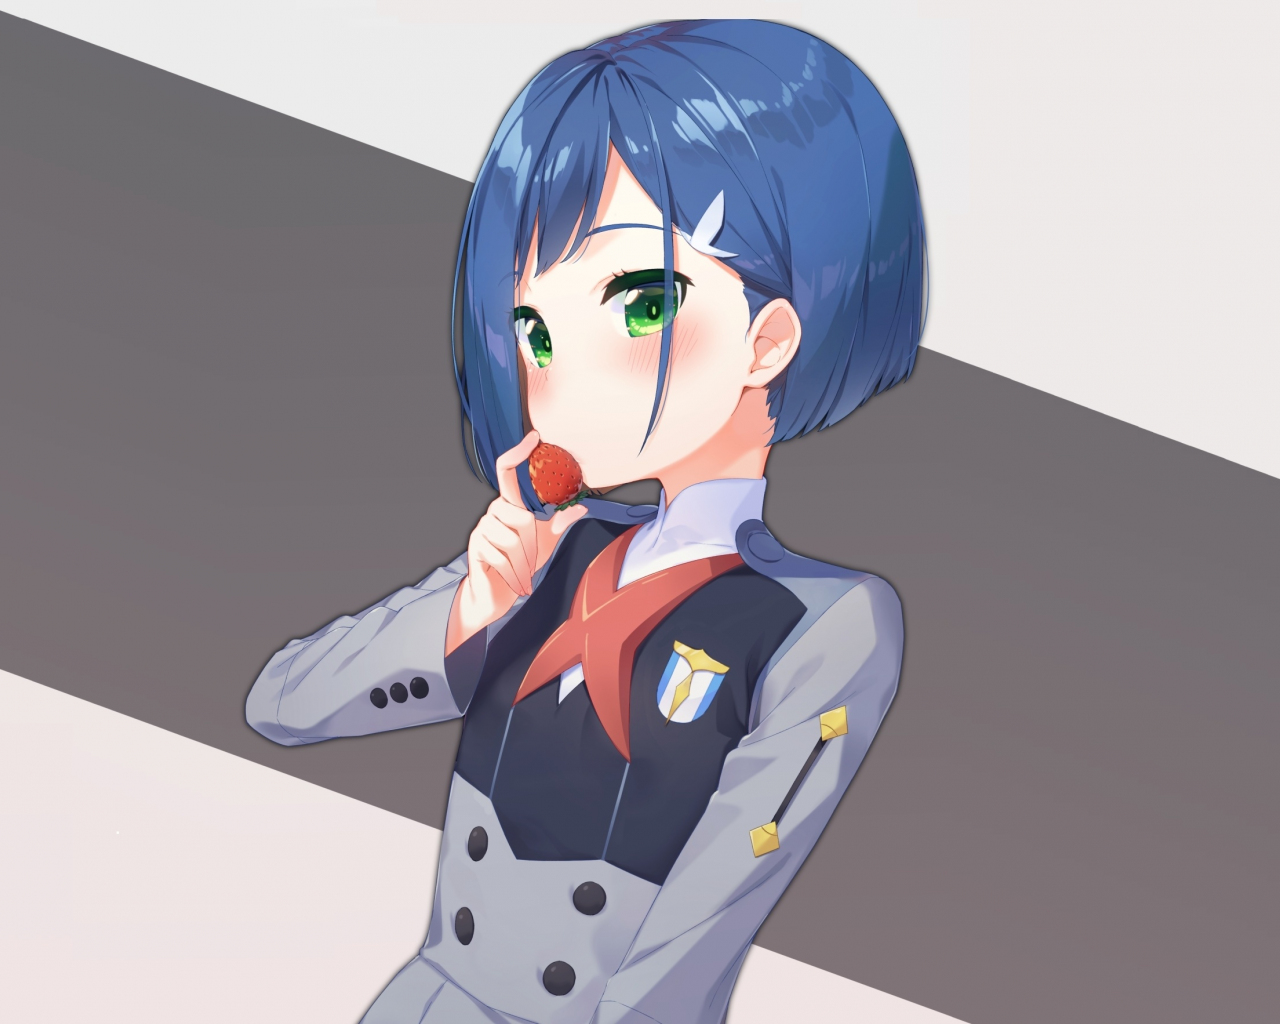 62 darling in the franxx wallpapers. 